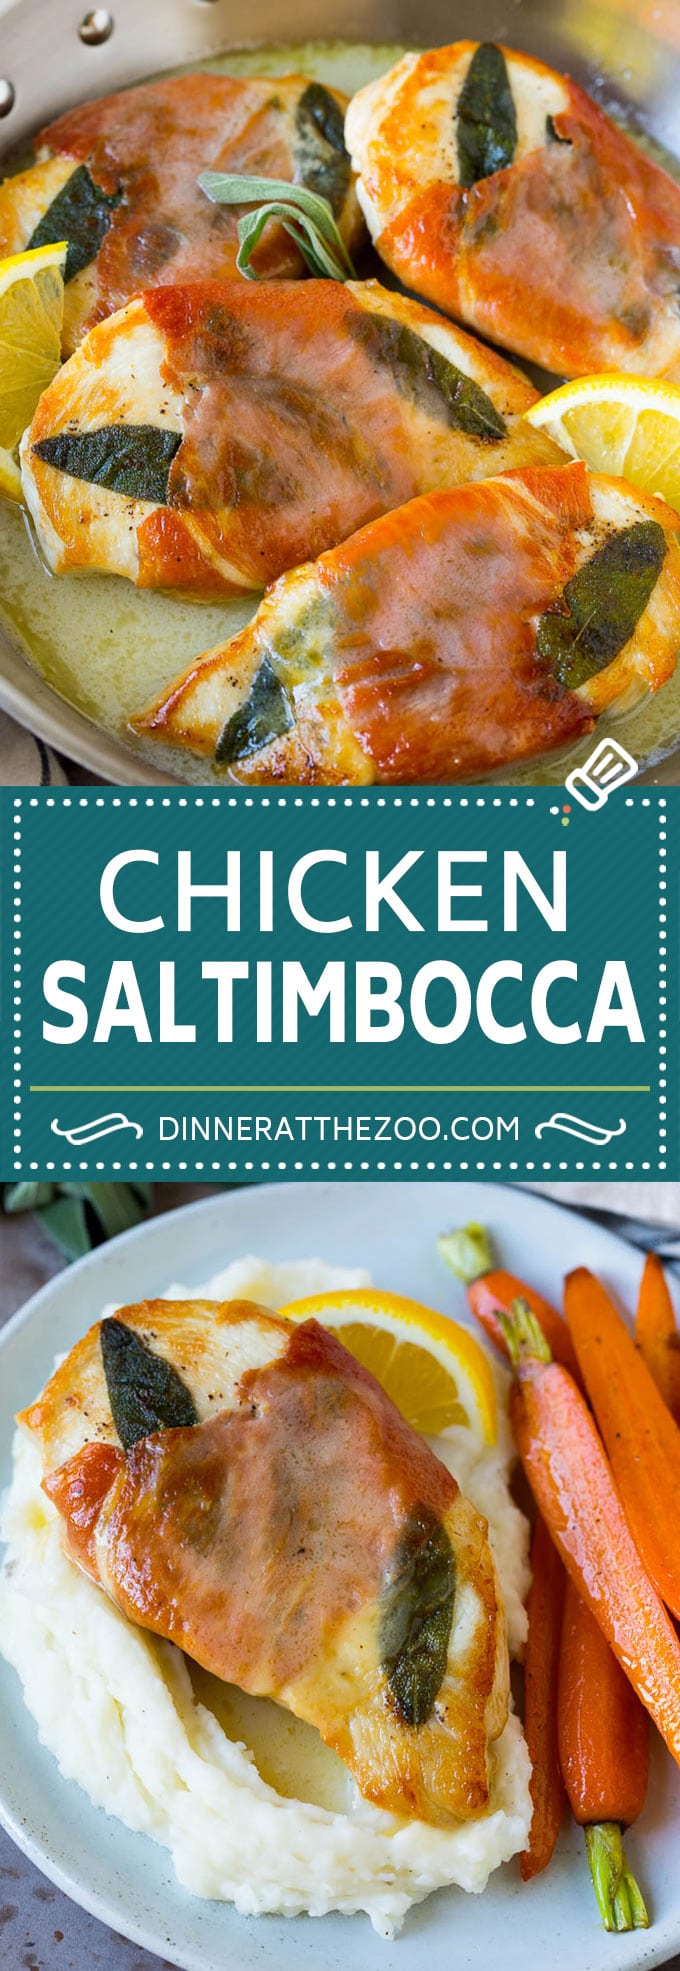 Chicken saltimbocca is chicken cutlets flavored with sage and prosciutto in a lemon sauce. #chicken #dinneratthezoo